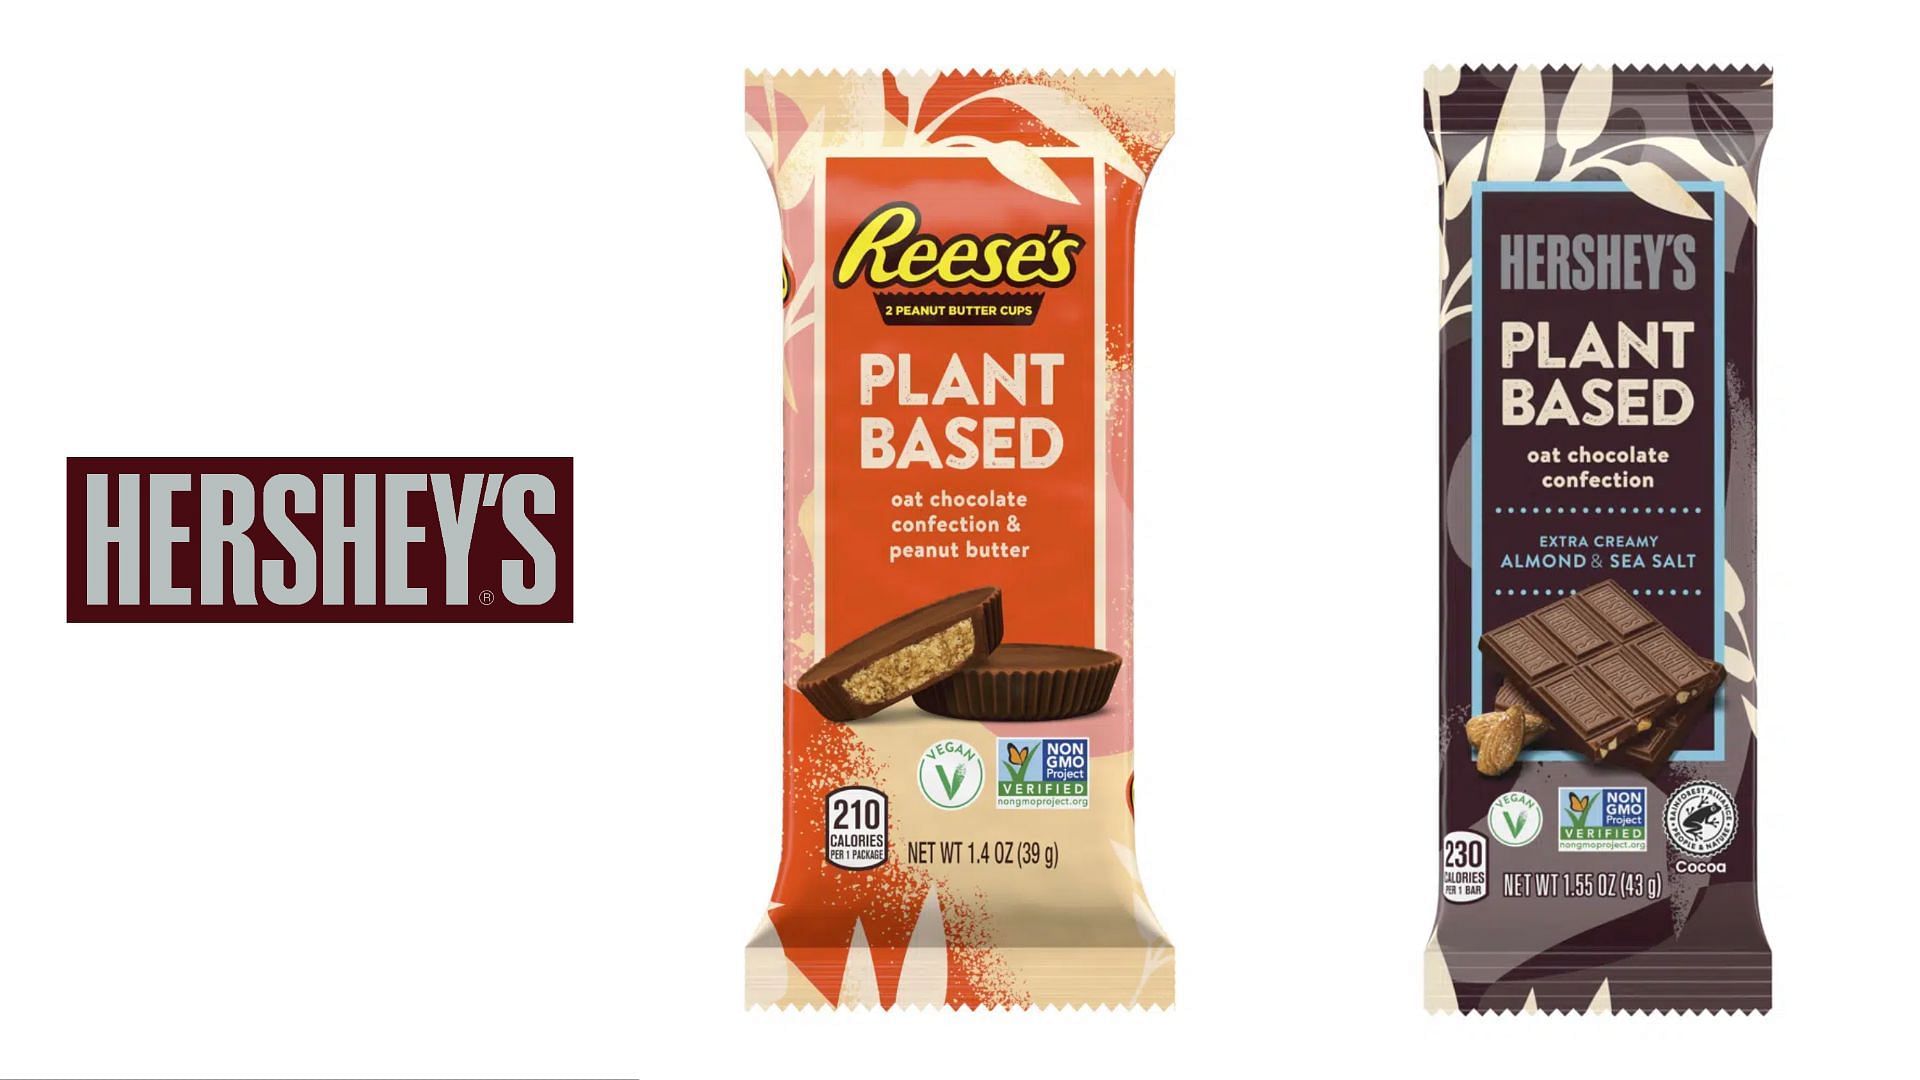 The new vegan chocolates will be available in major stores across the country (Image via The Hershey Company)